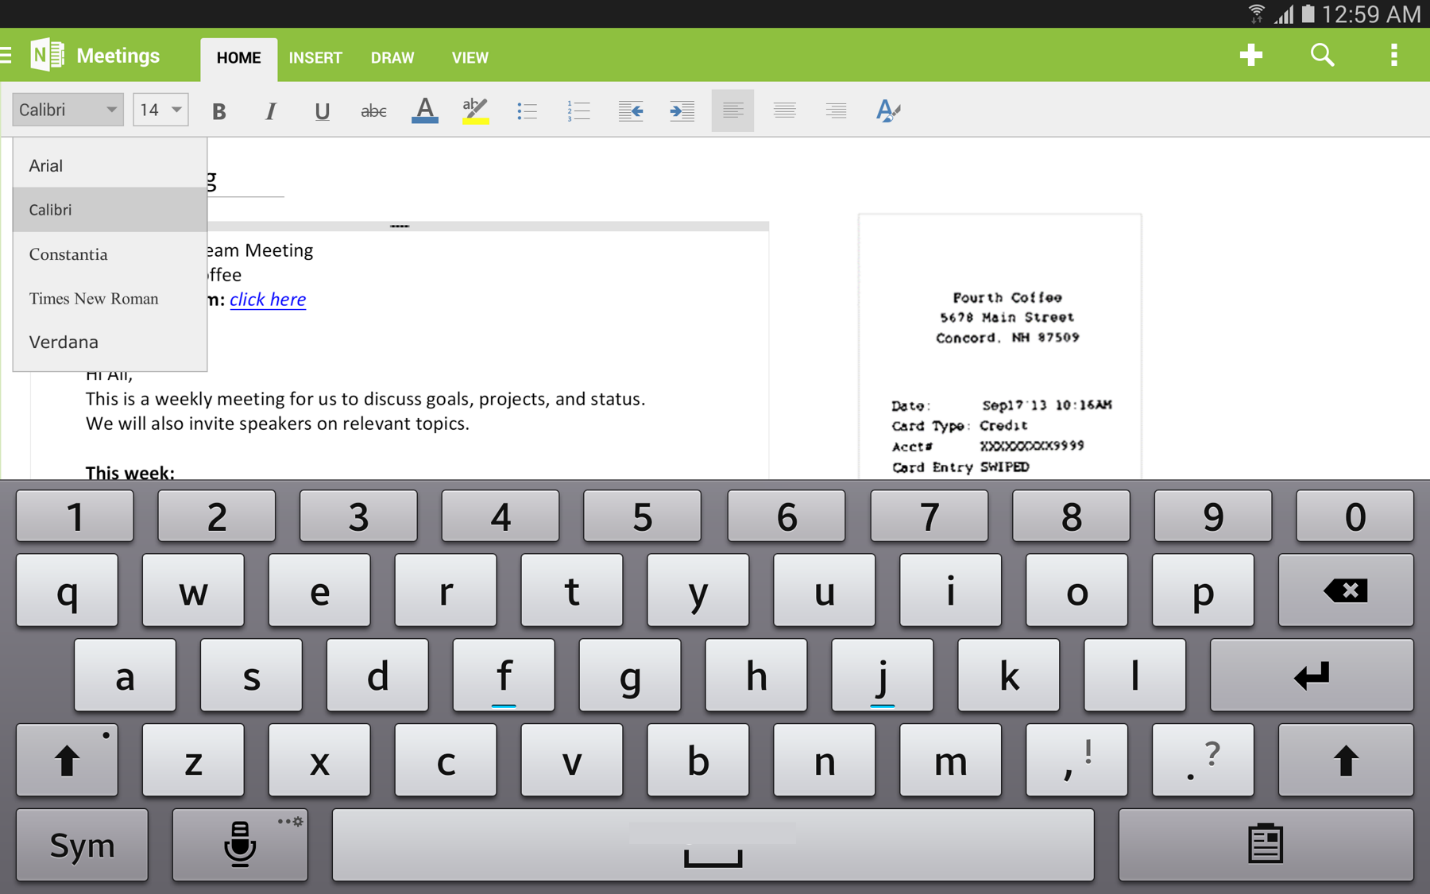 full version of onenote for android